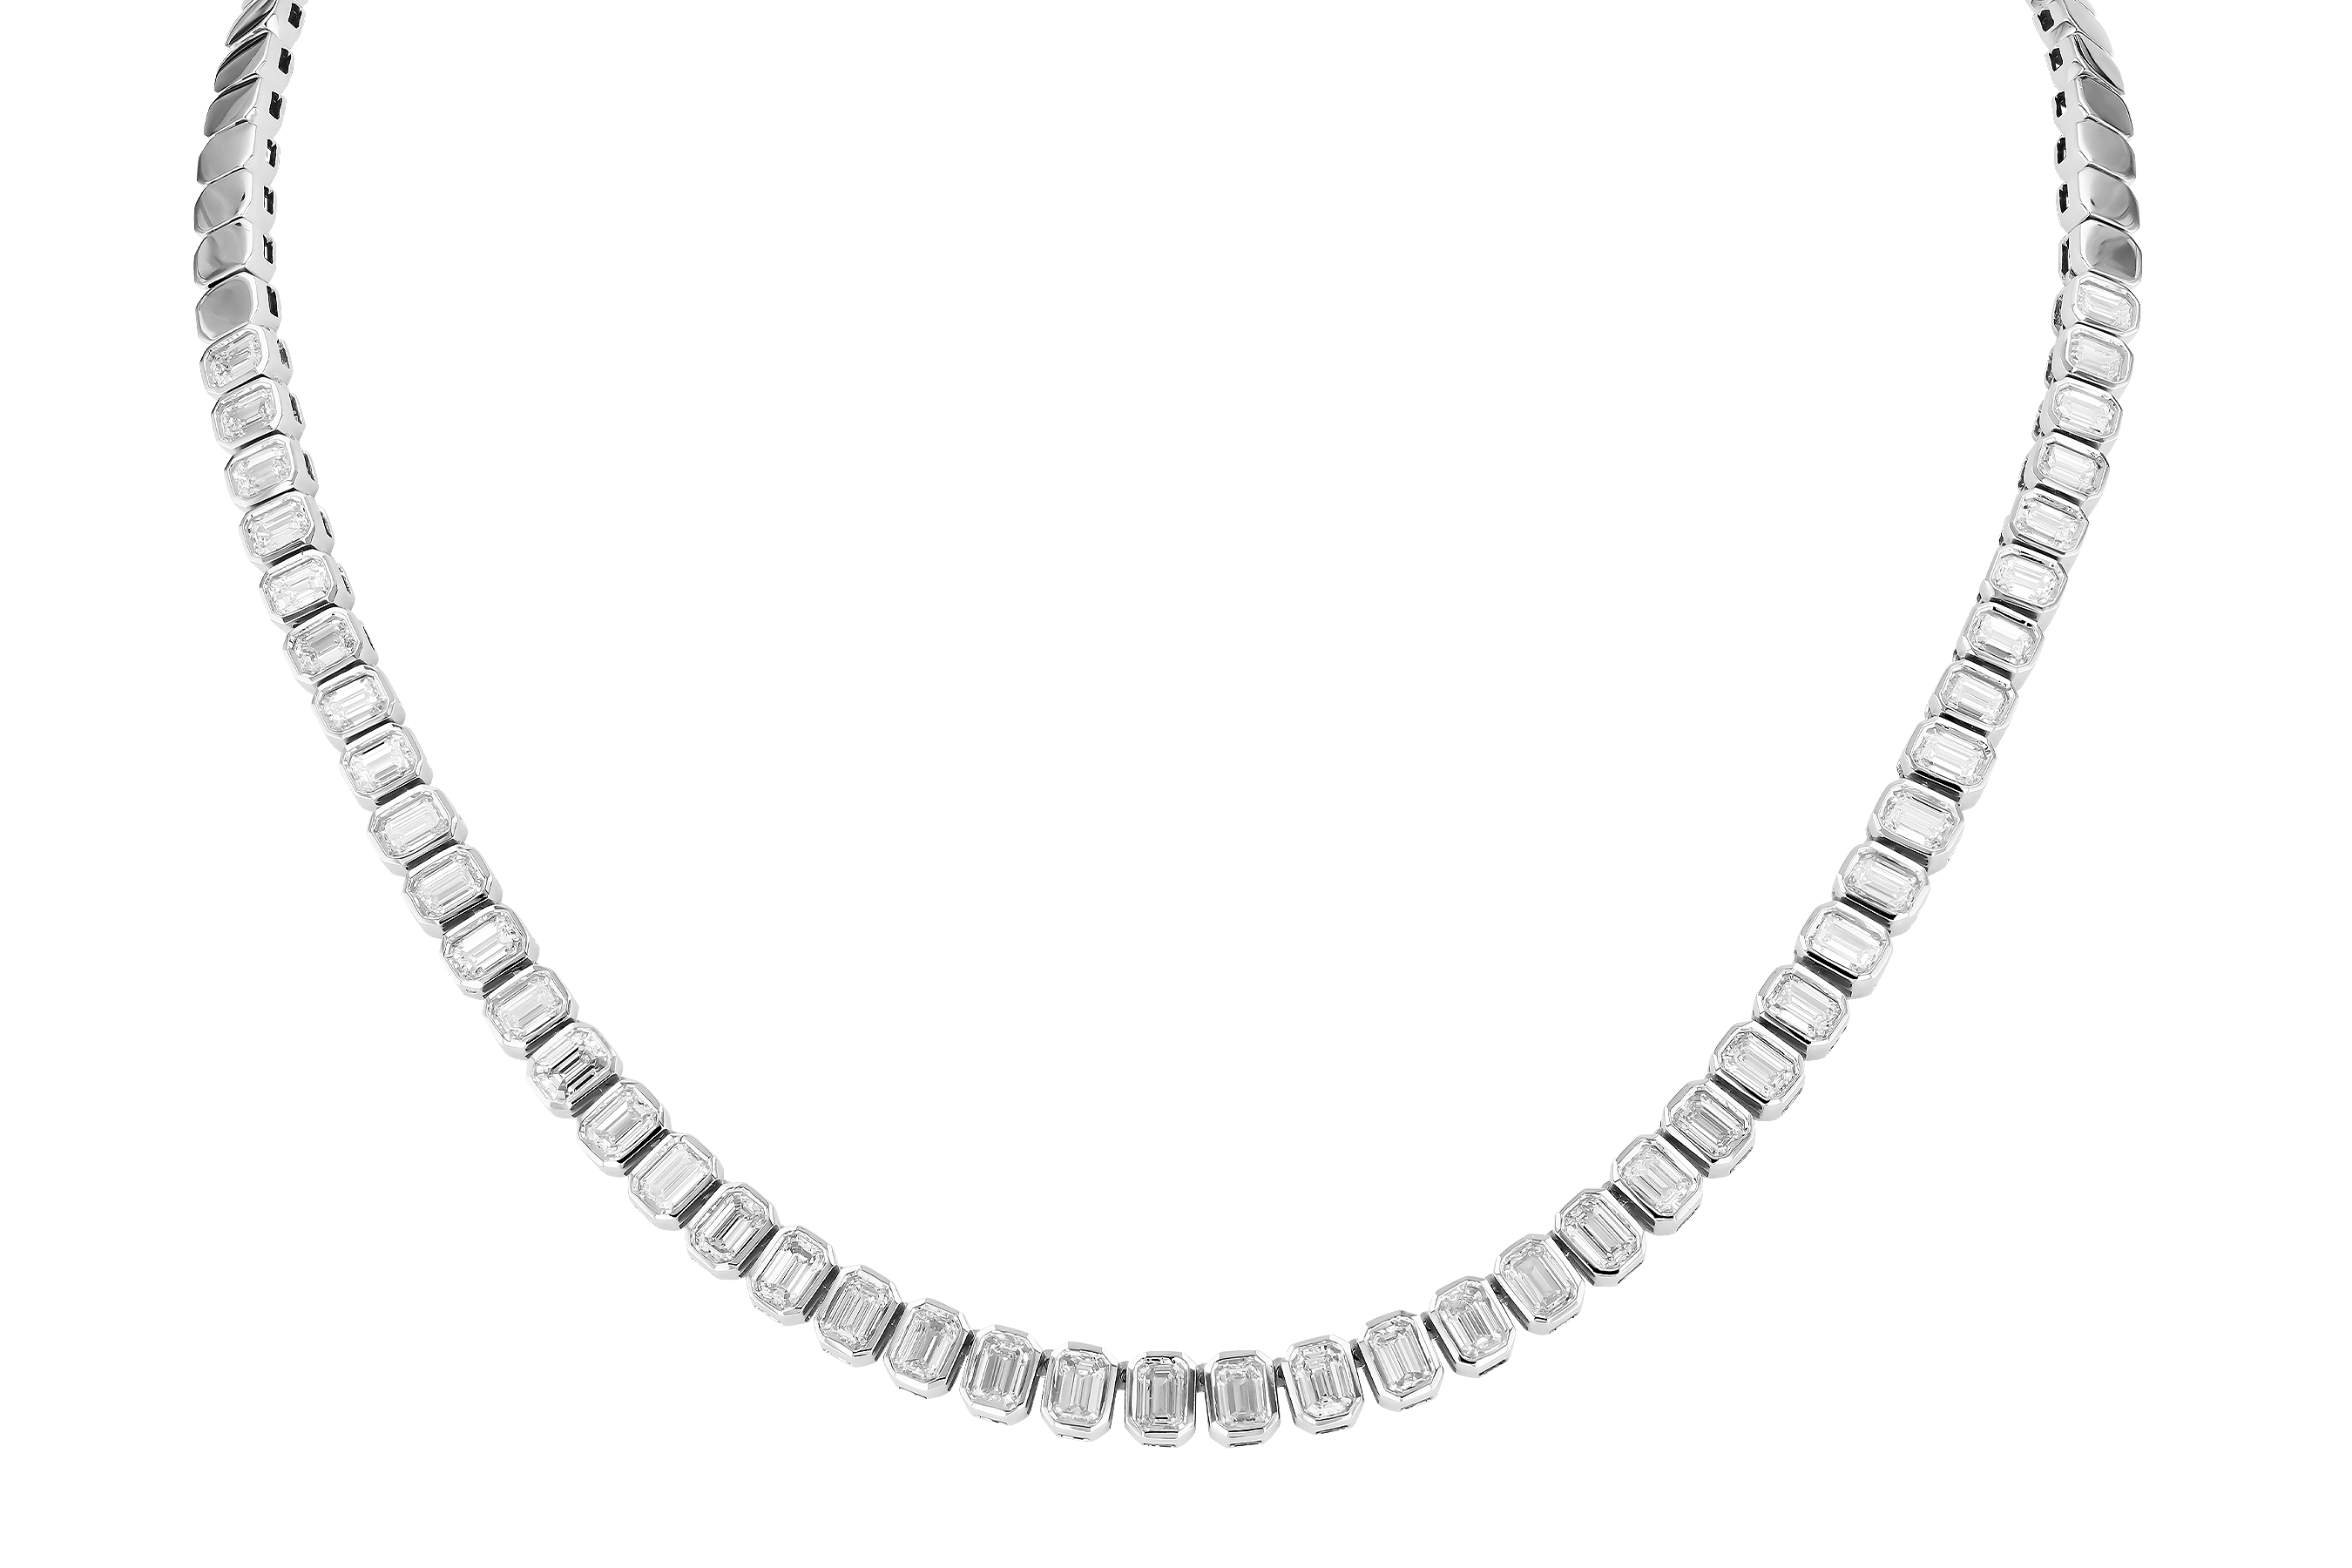 M273-78461: NECKLACE 8.25 TW (16 INCHES)